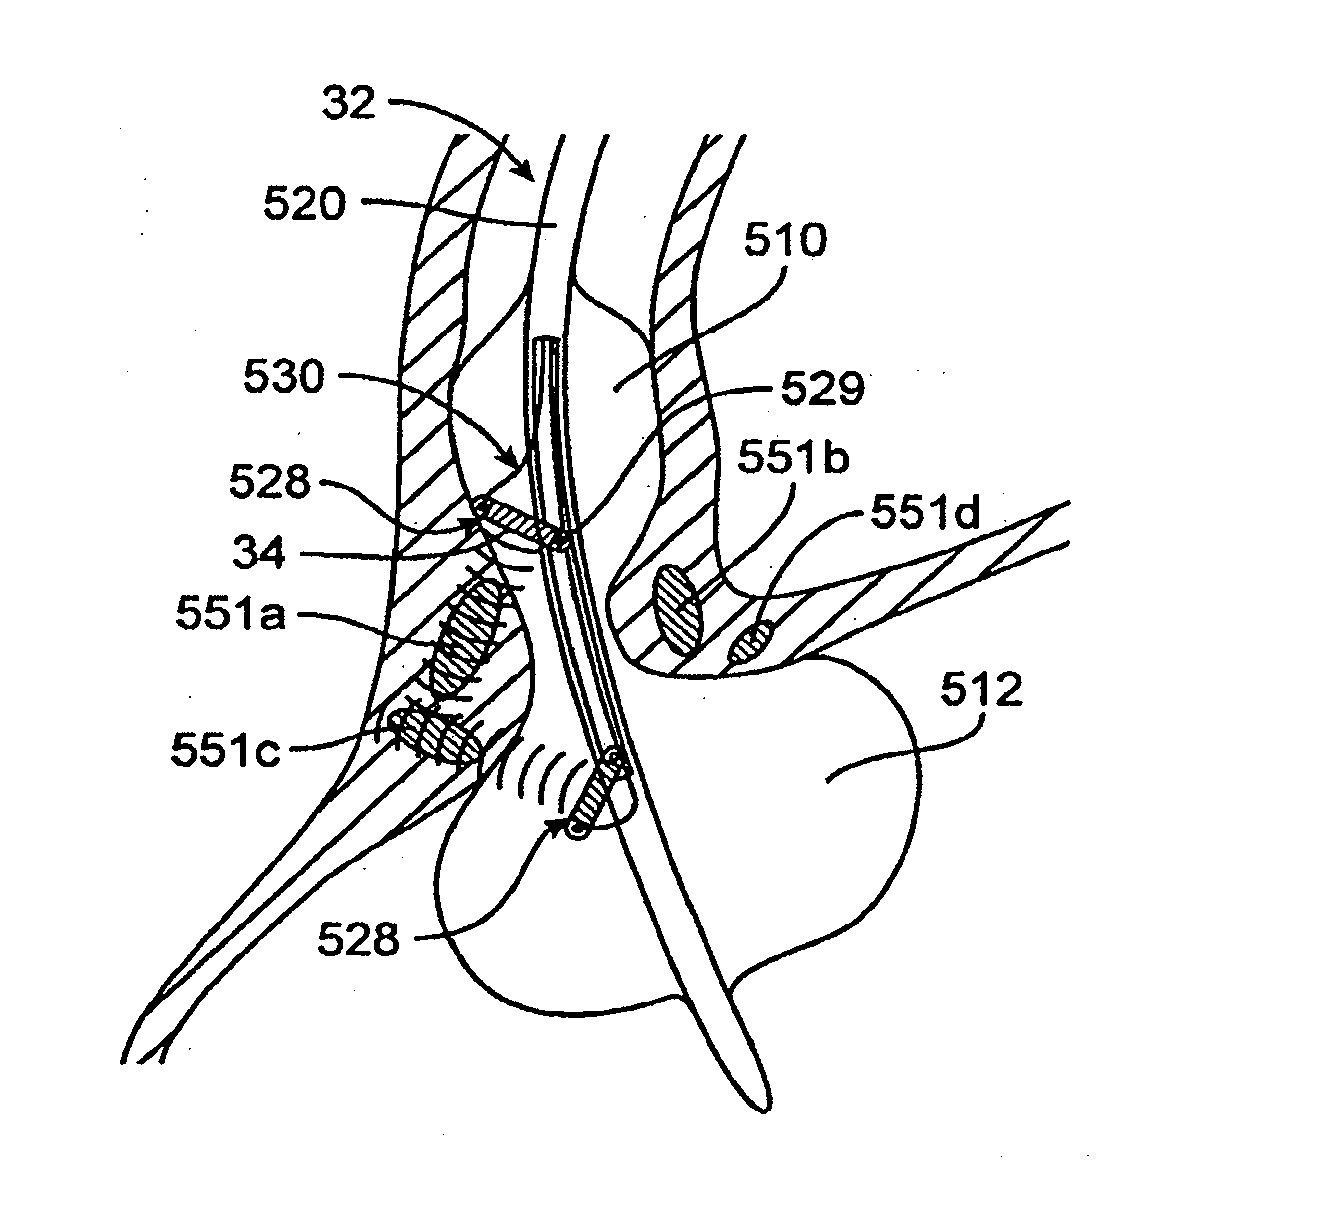 Intraluminal methods of ablating nerve tissue